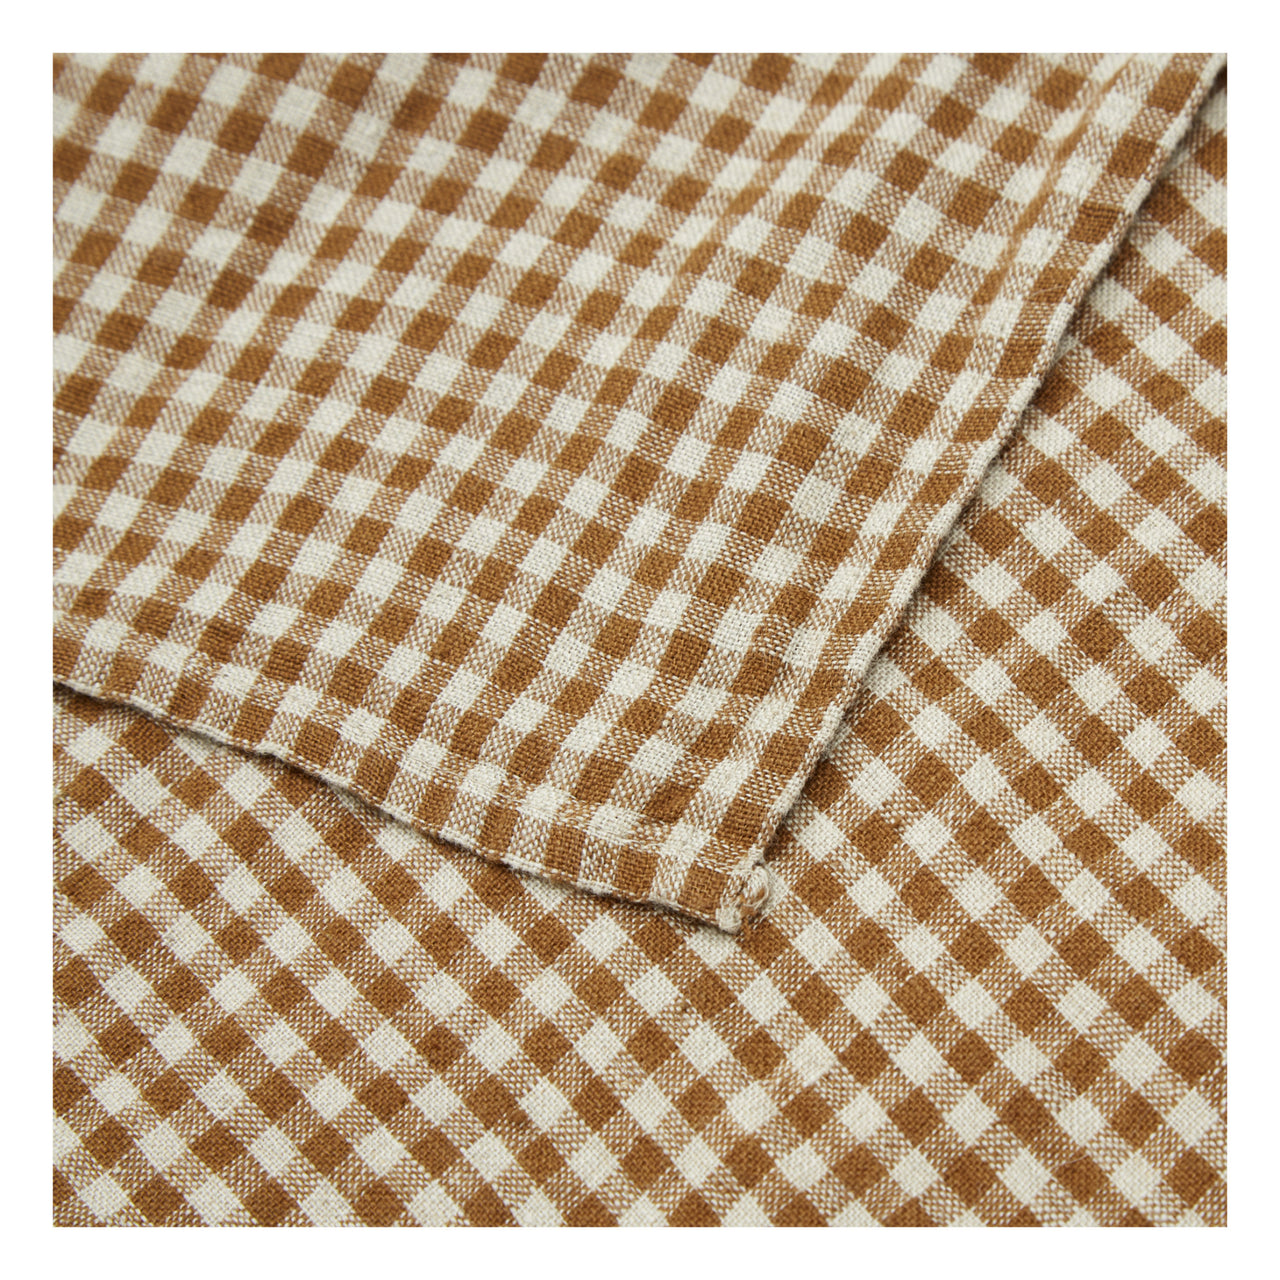 Linen Napkin / Placemat Gingham Gold